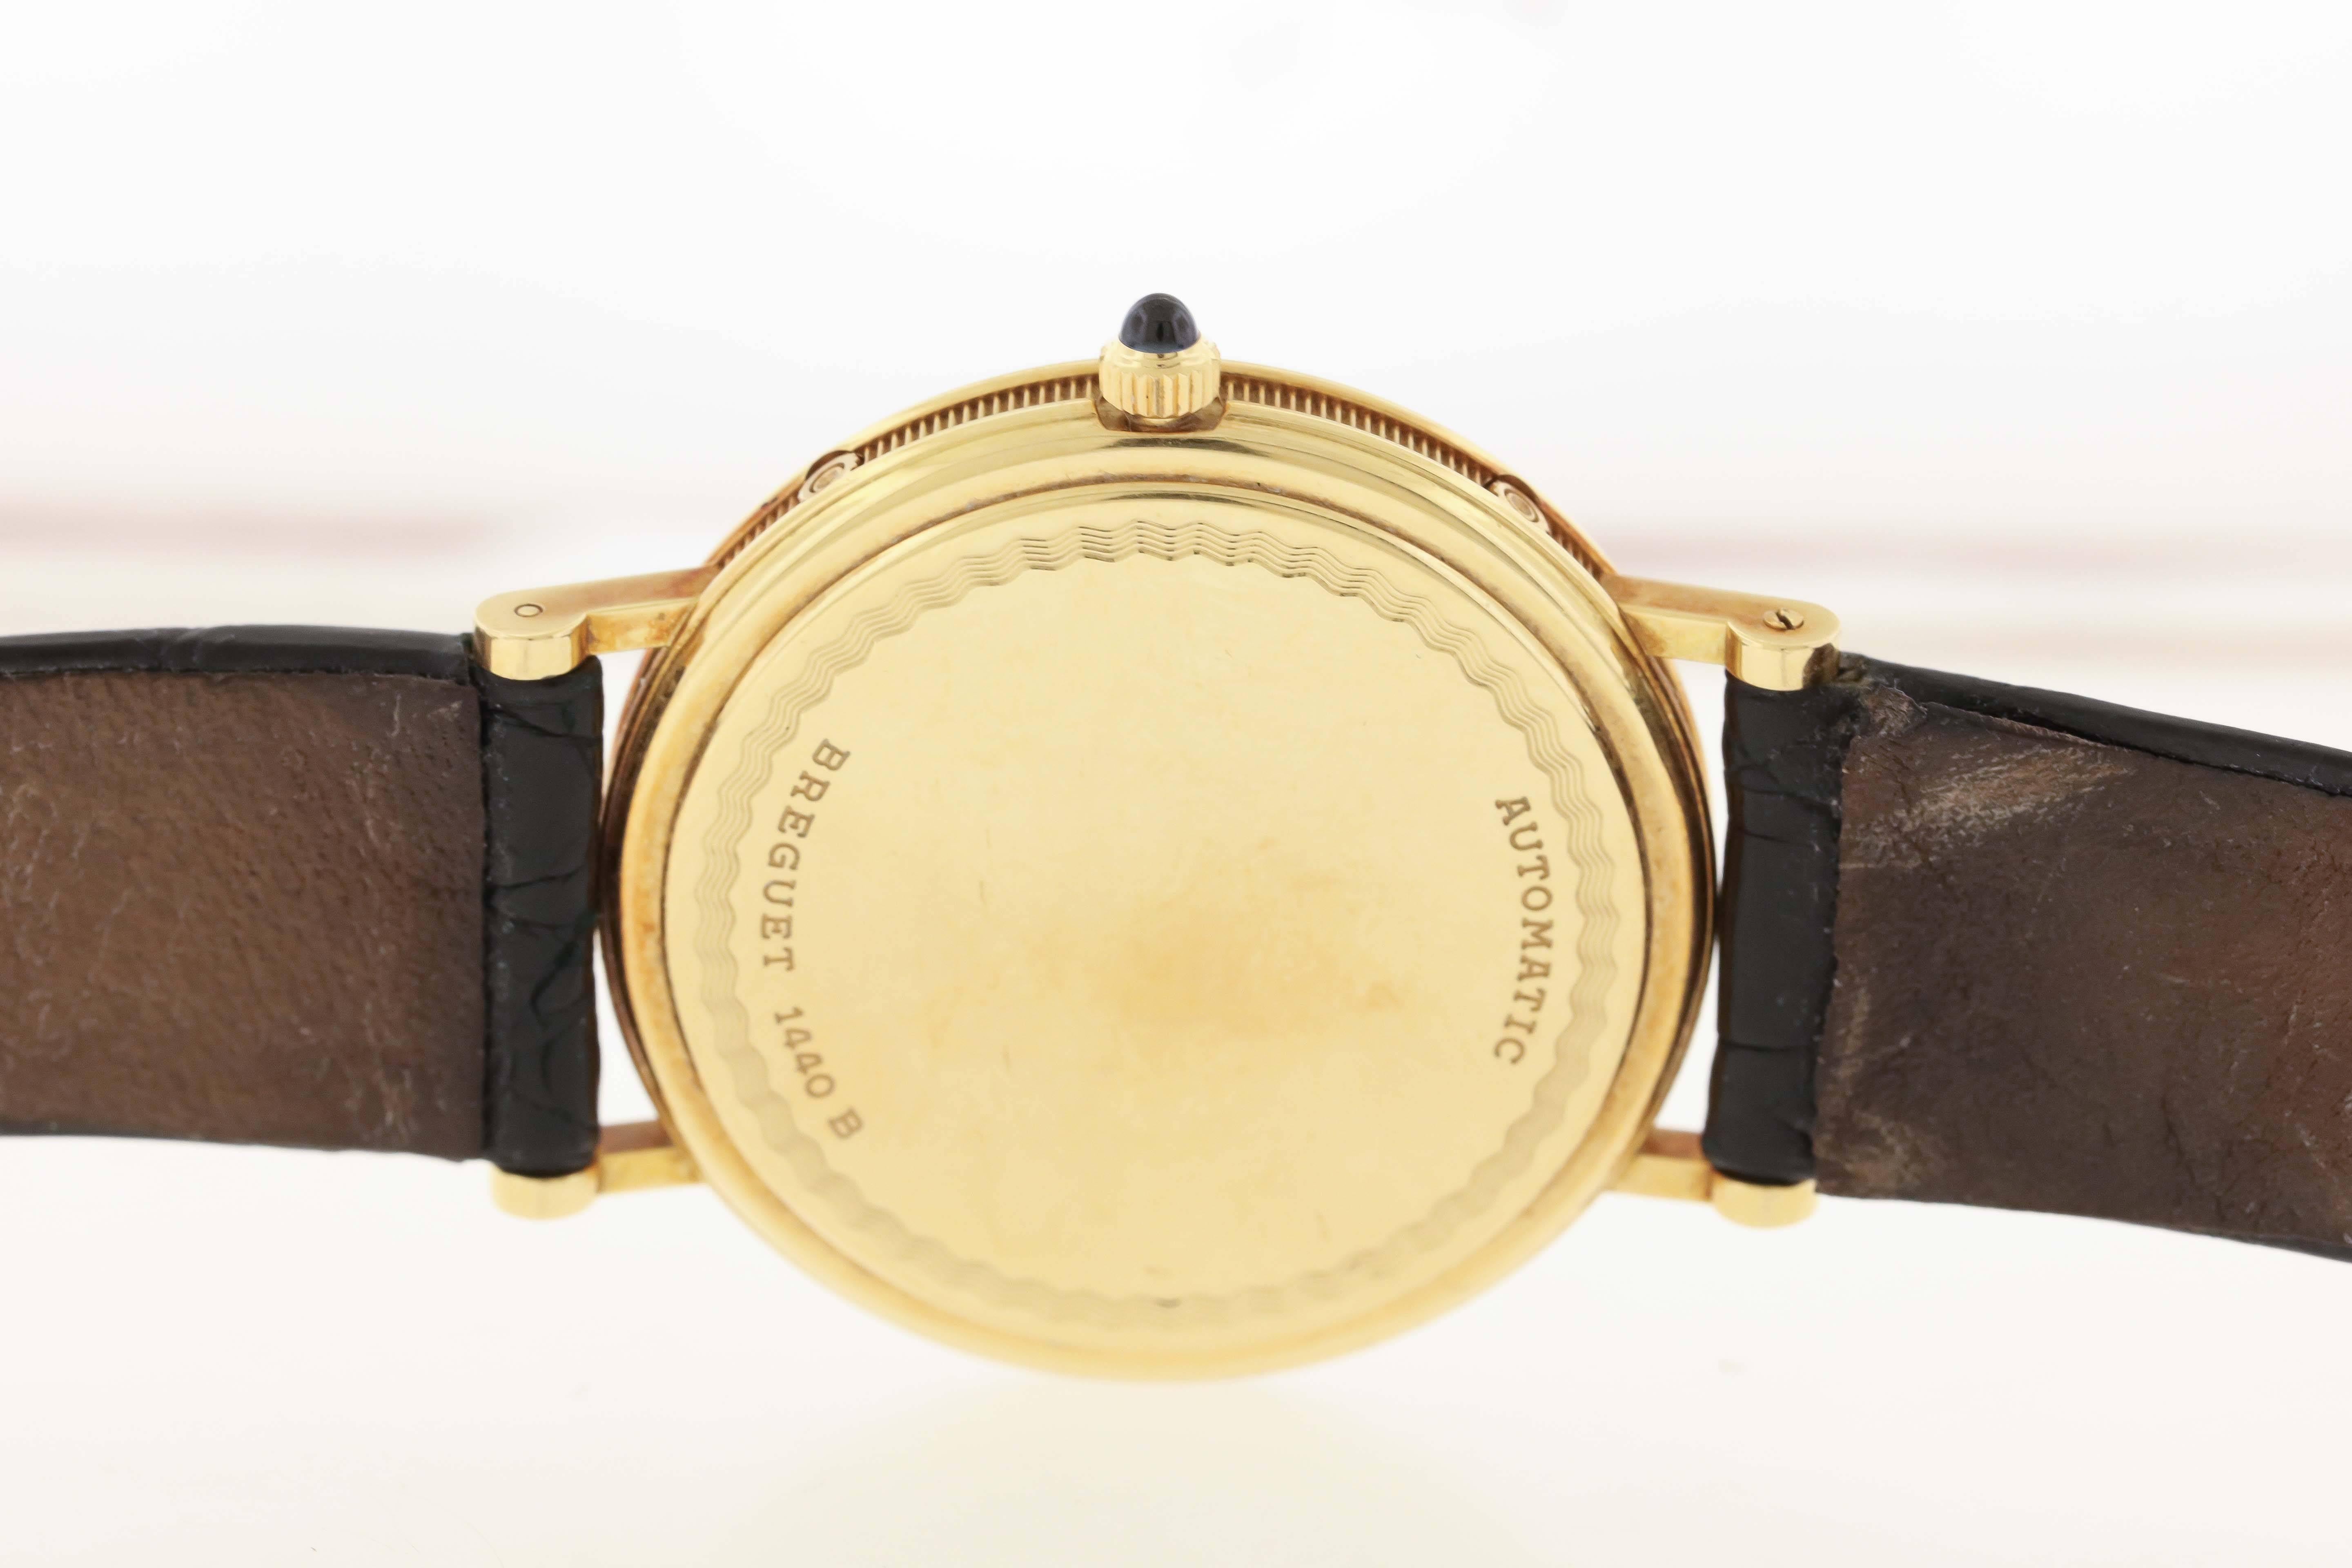 18K yellow gold Breguet Classique Ref. BA3330, circa 2004, is a self-winding thin moonphase calendar wristwatch. The 36mm case has a snap back with engraved border and unique number, reeded band, rounded bezel and sapphire-set crown.  The two tone